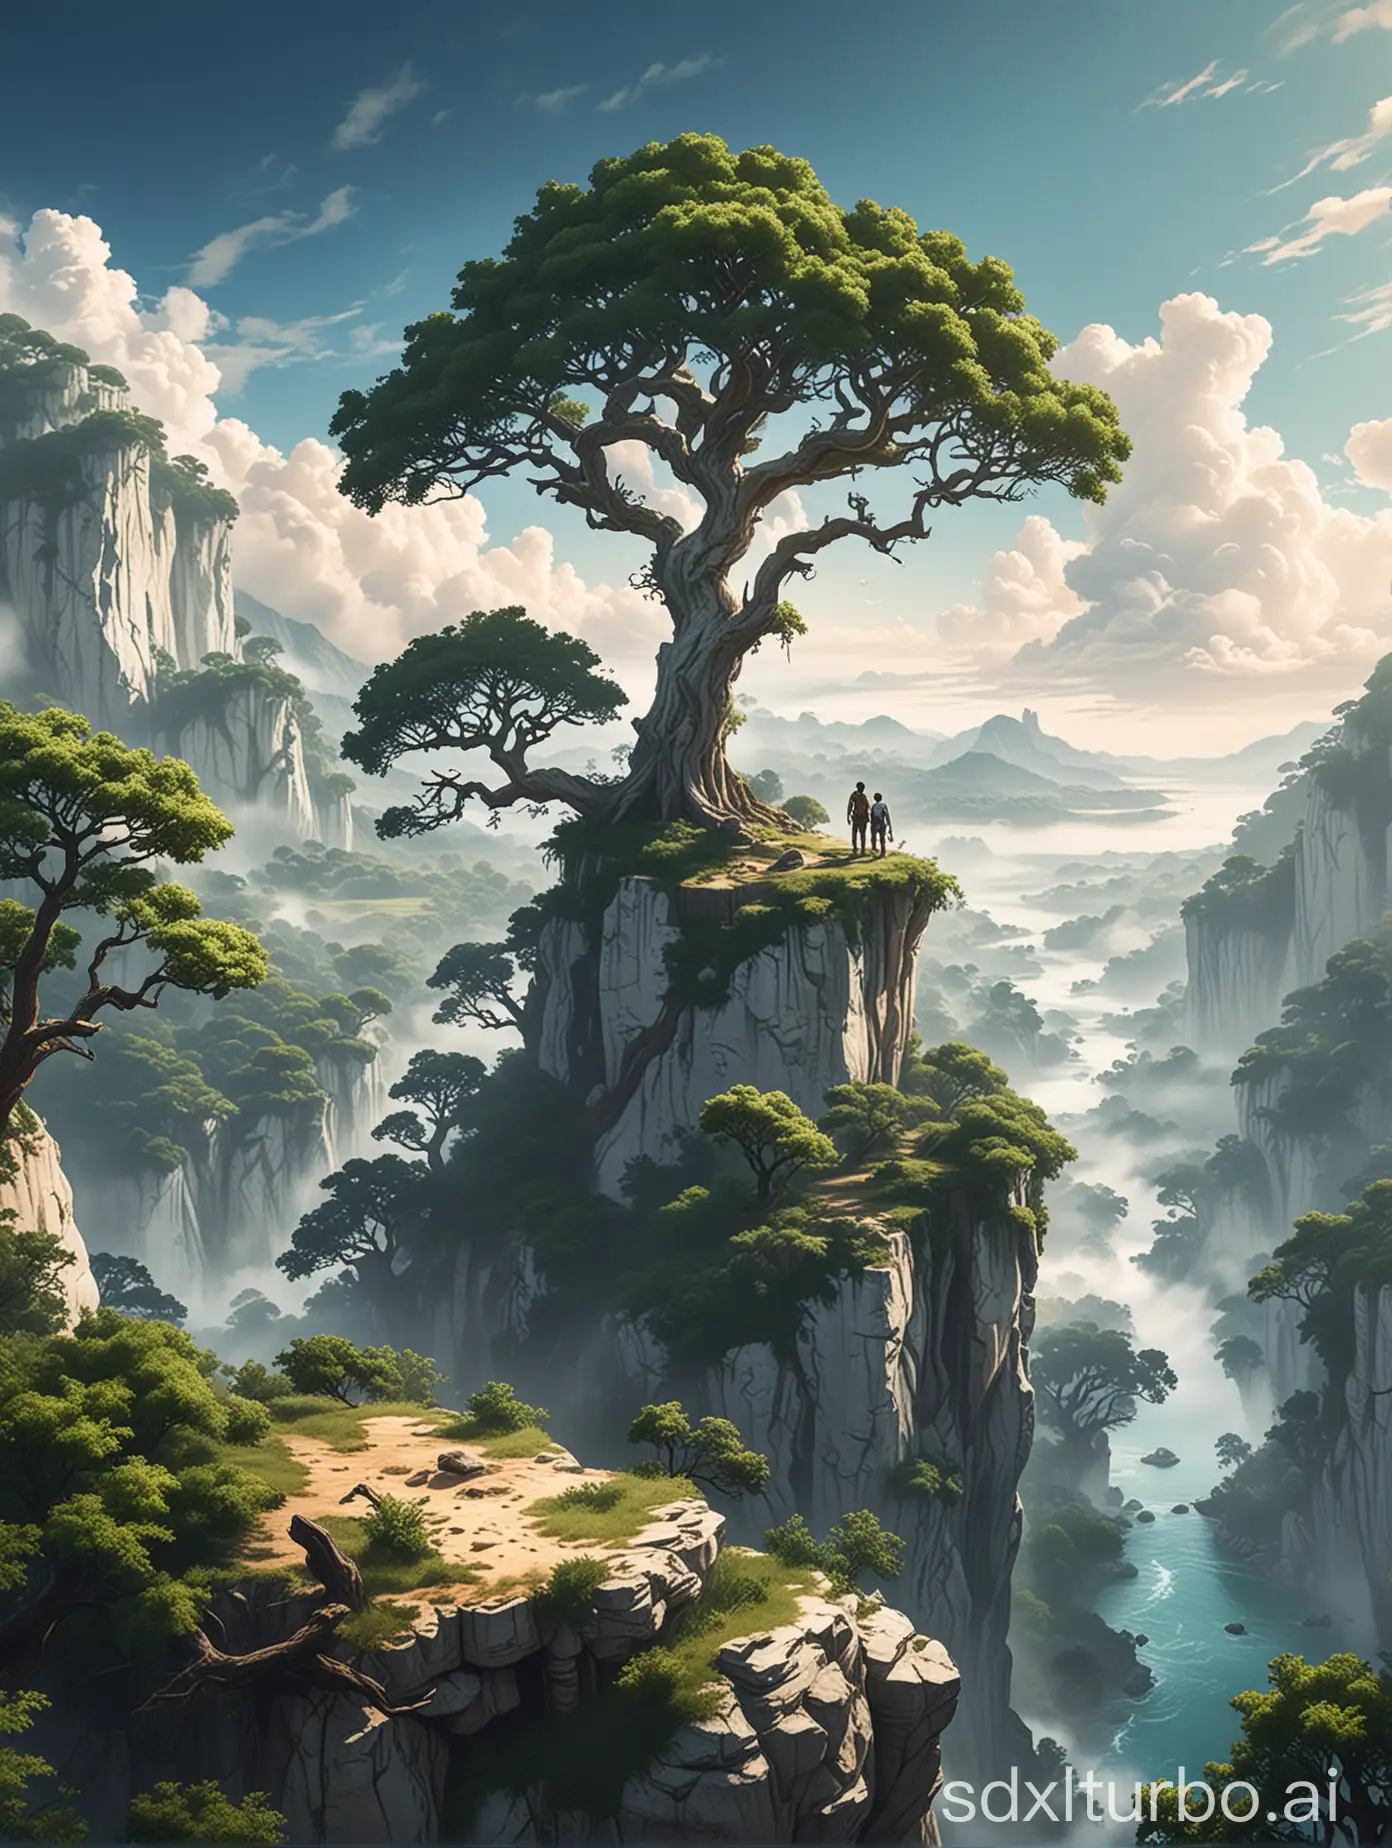 Majestic-Oak-Tree-atop-Towering-White-Cliff-with-River-and-Fluffy-Clouds-Uncharted-Game-Art-Style